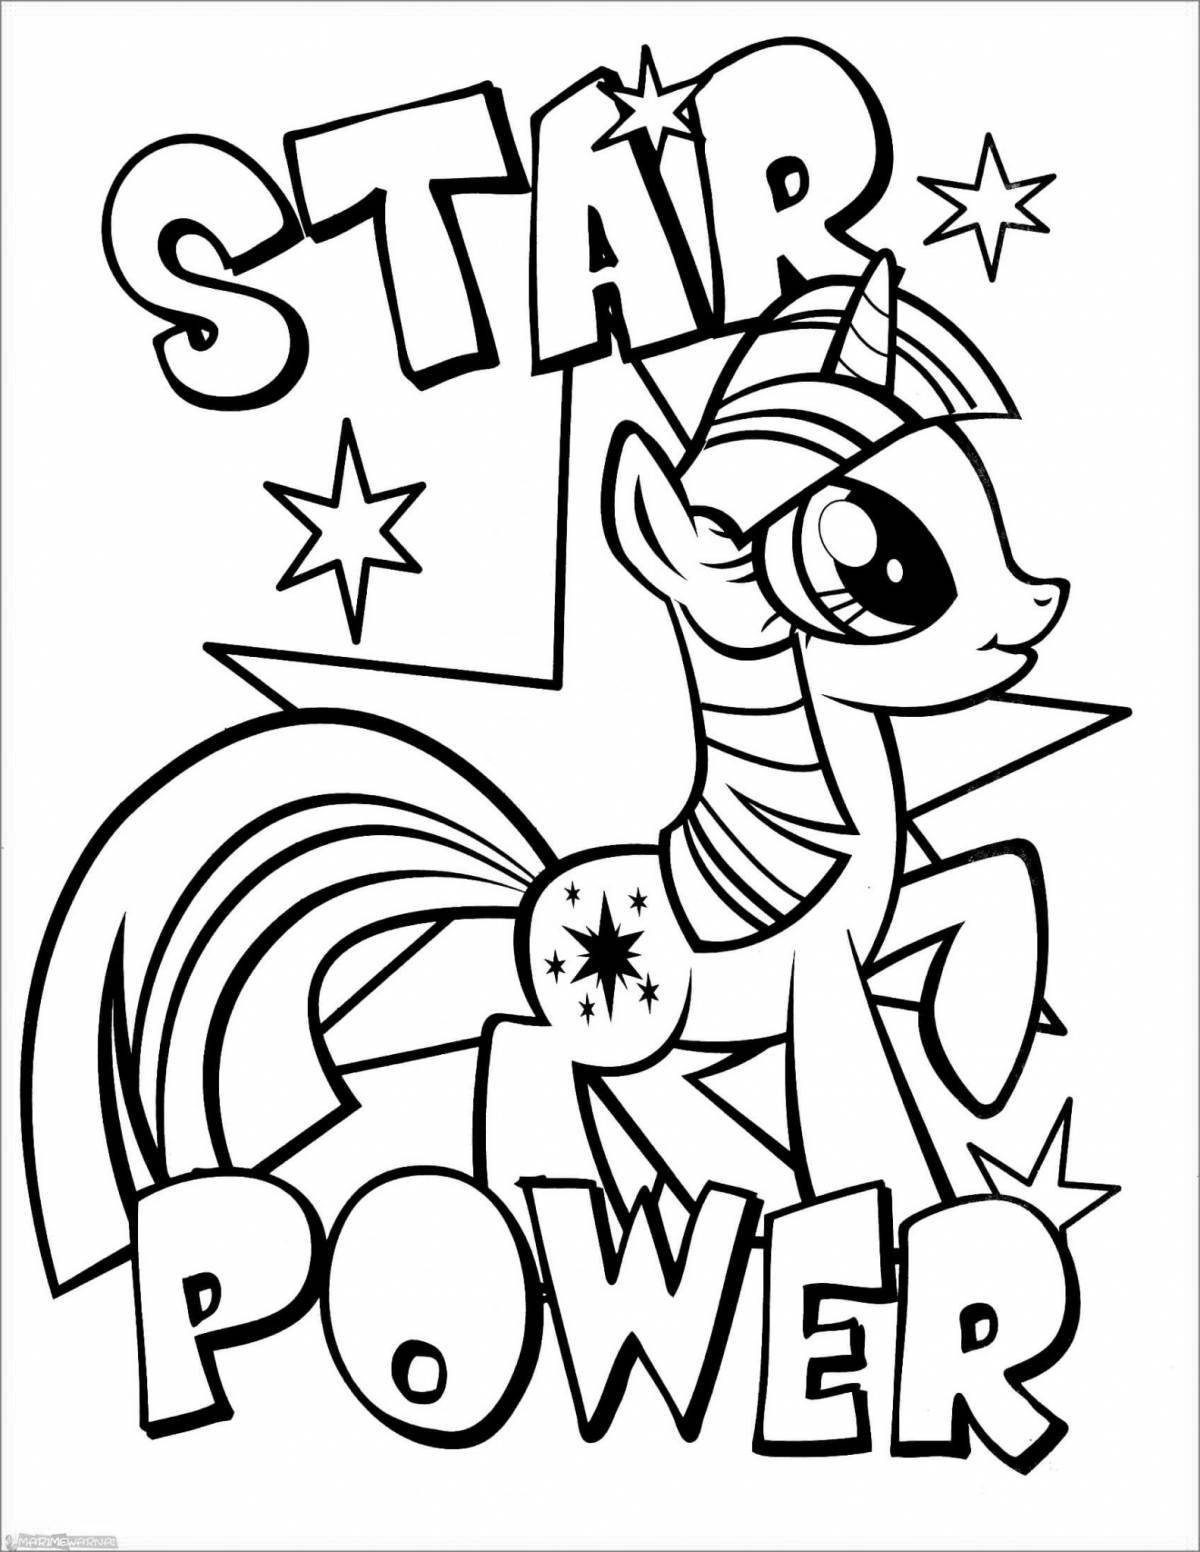 Amazing twilight sparkle coloring page